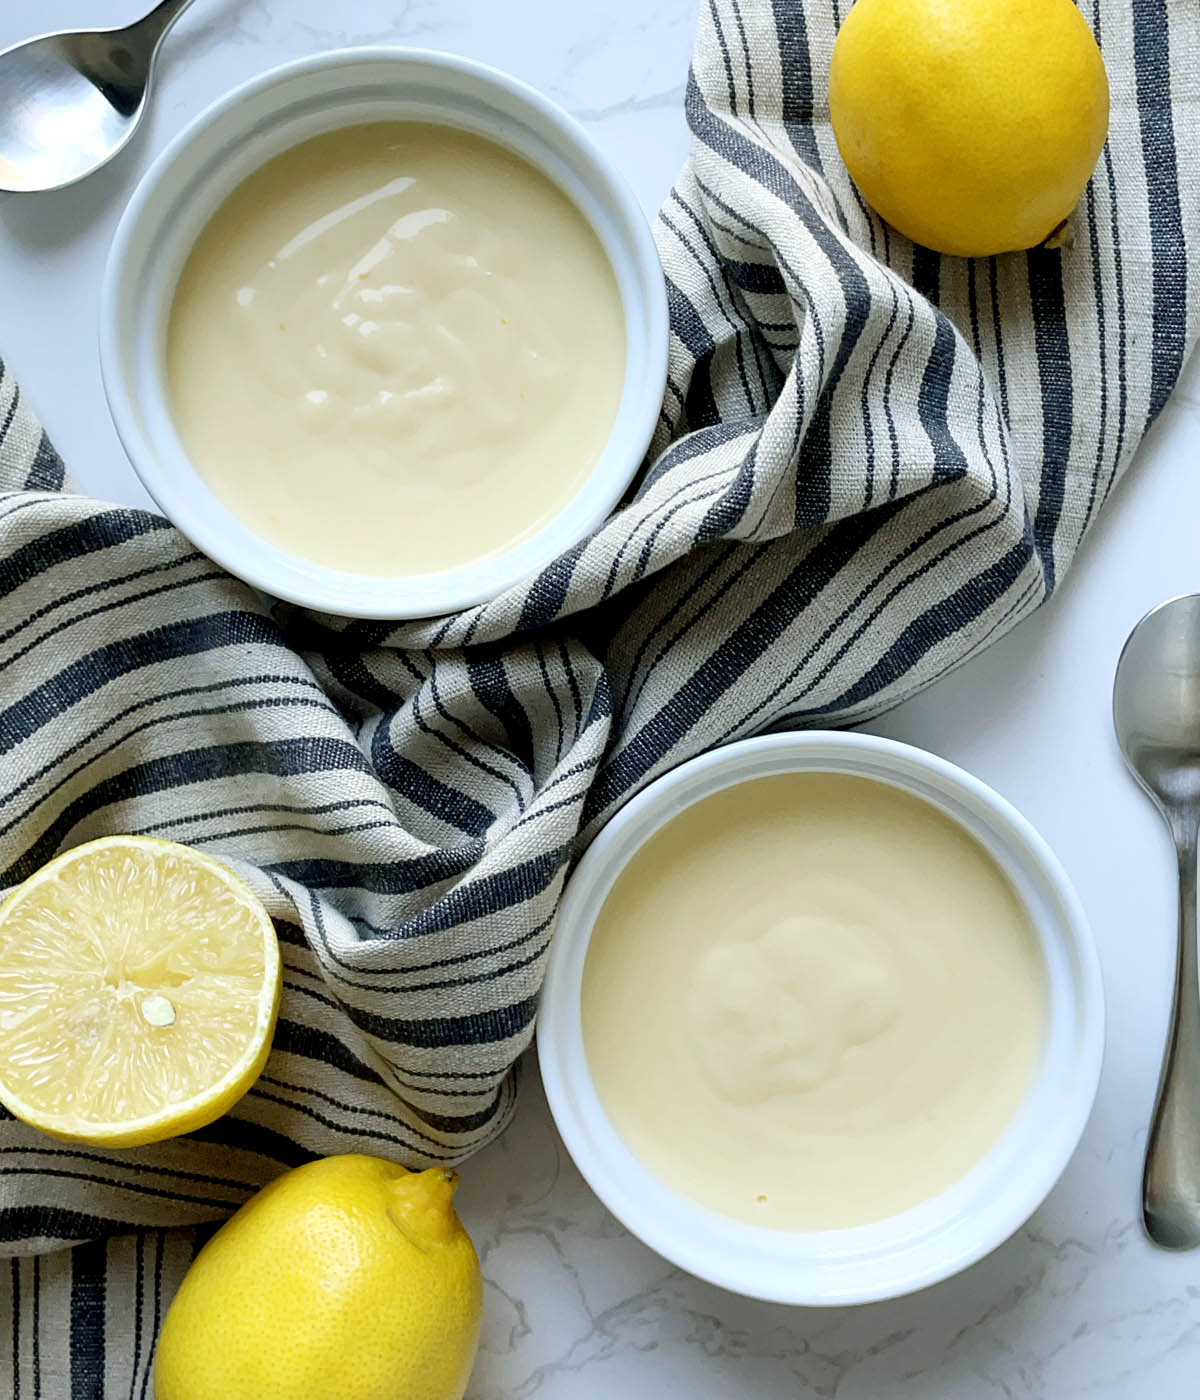 Two round white dishes containing lemon pudding, two spoons, a whole lemon, and a cut lemon.